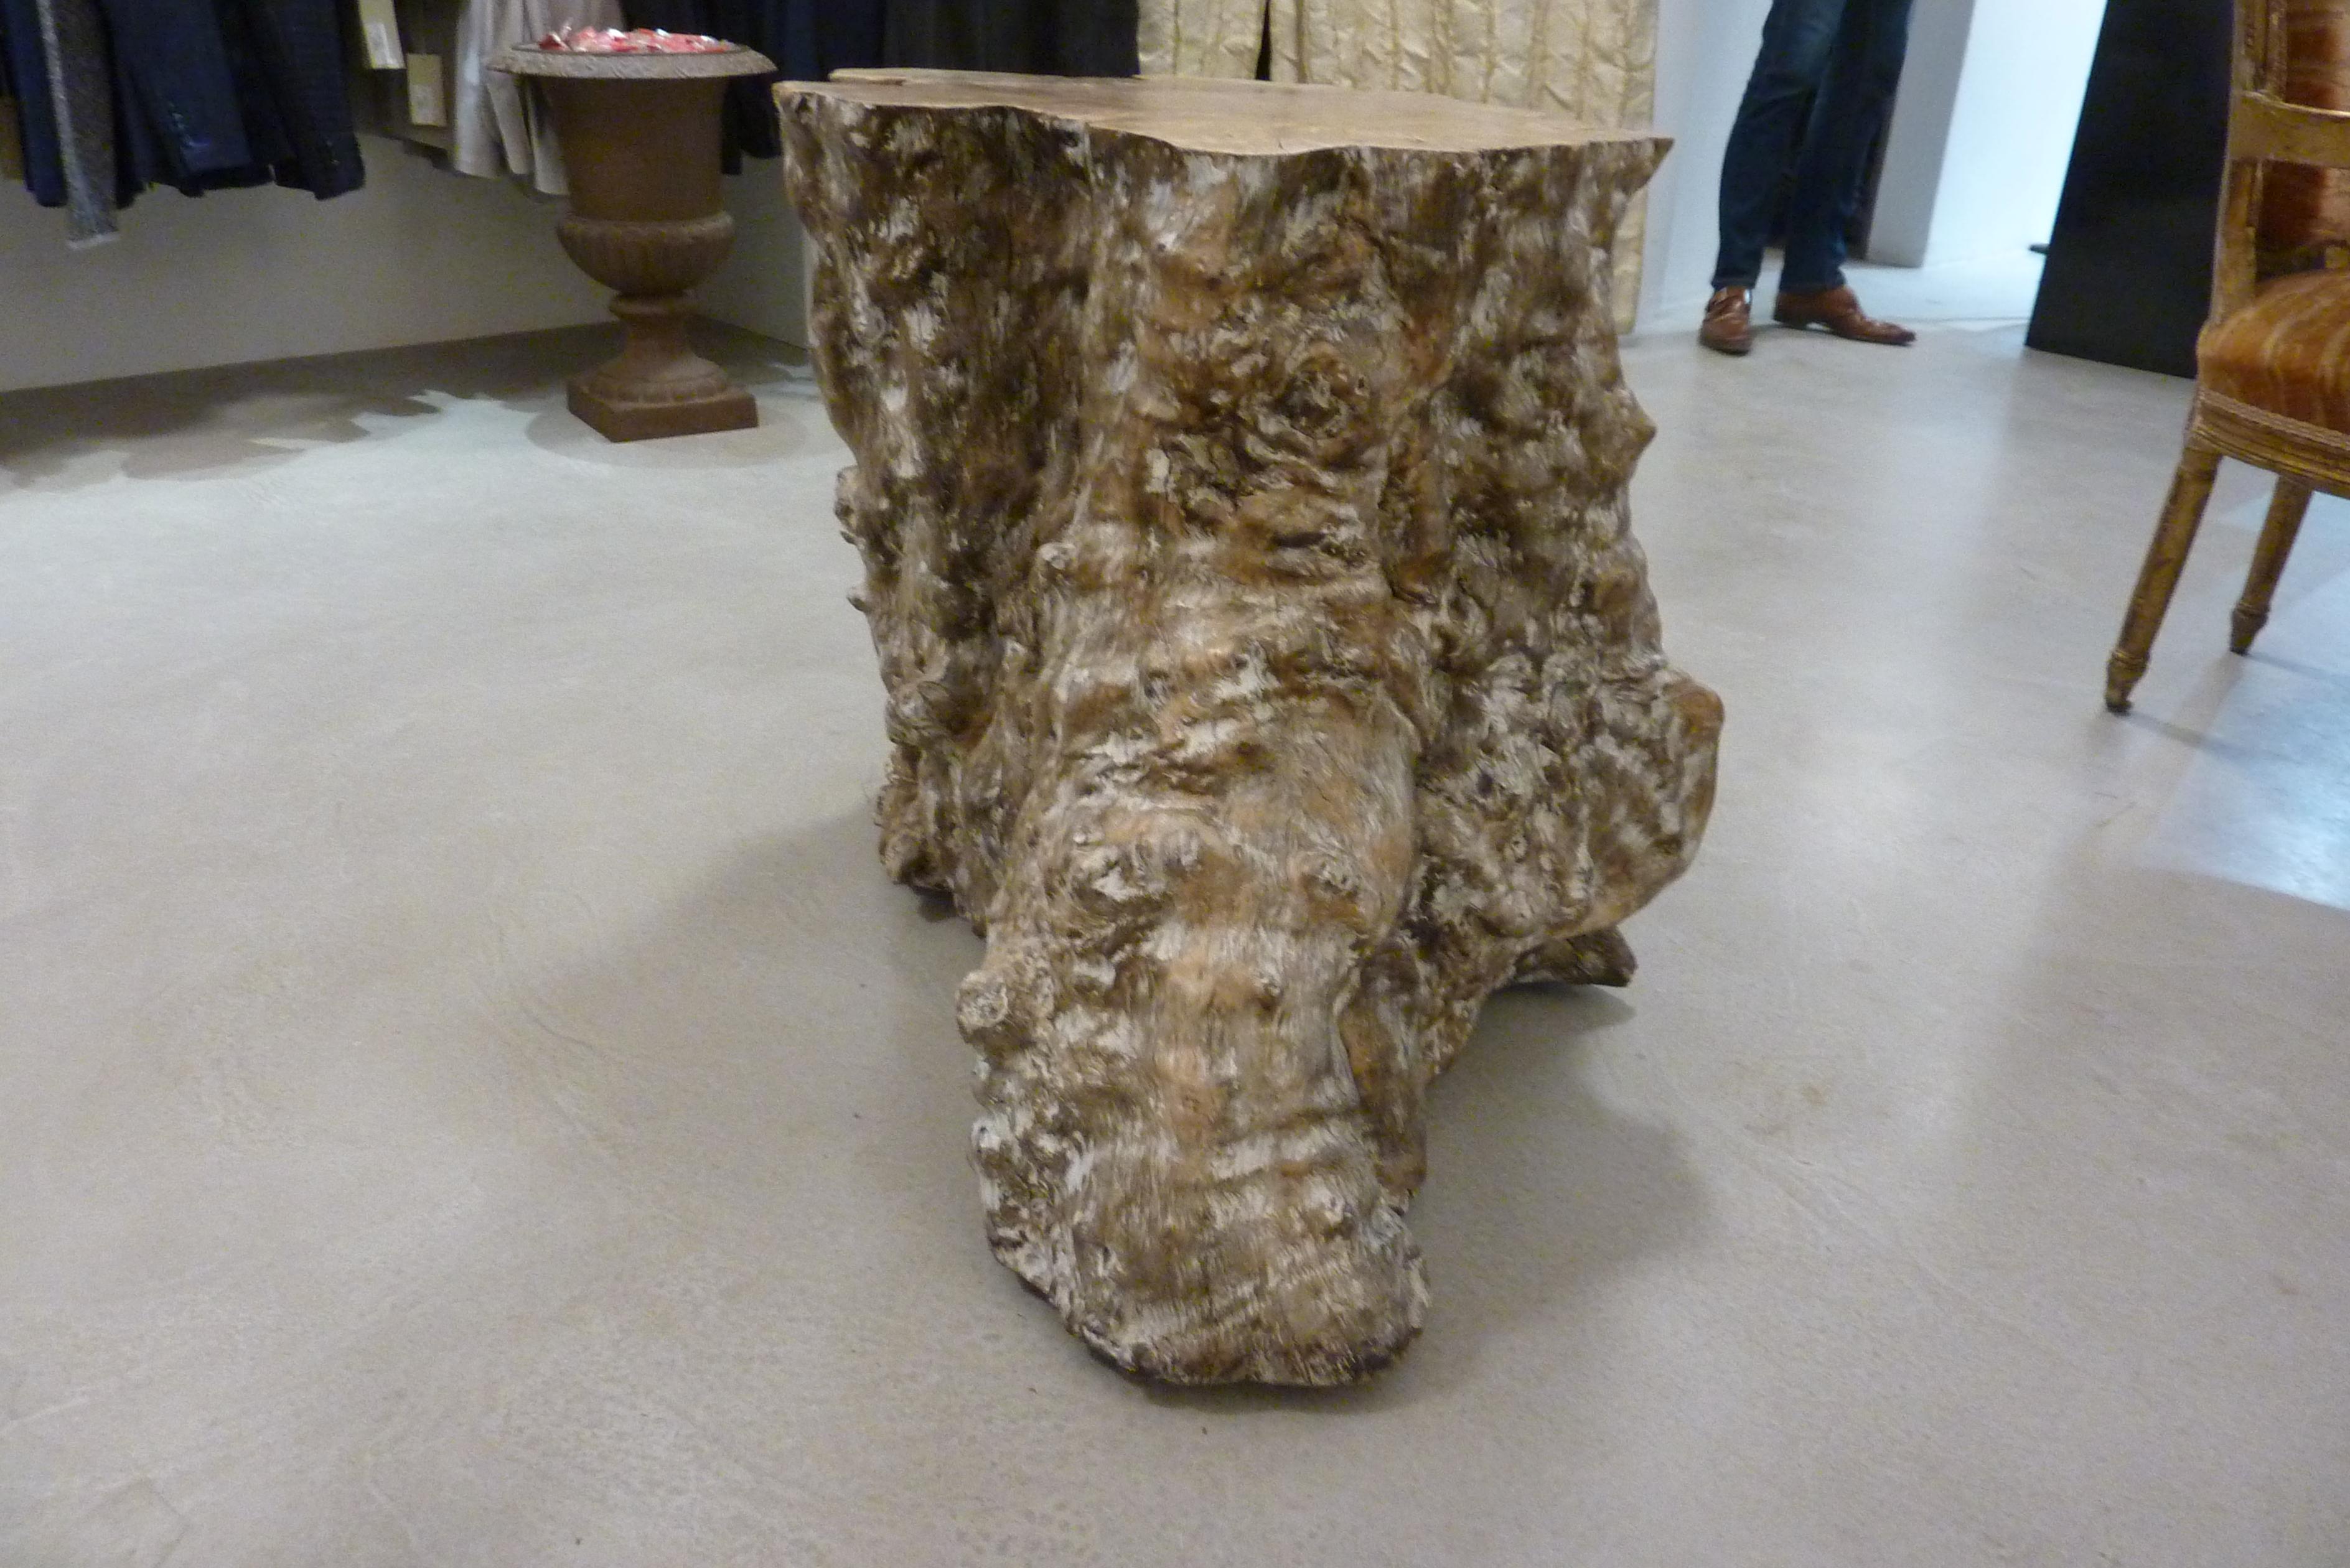 Table made from an Asian tropical forest tree trunk with roots.
Has always been in our private collection and served as an object in the hall.
Industrial wheels have been attached to the bottom, to make the table easier to move.
It truly is an eye